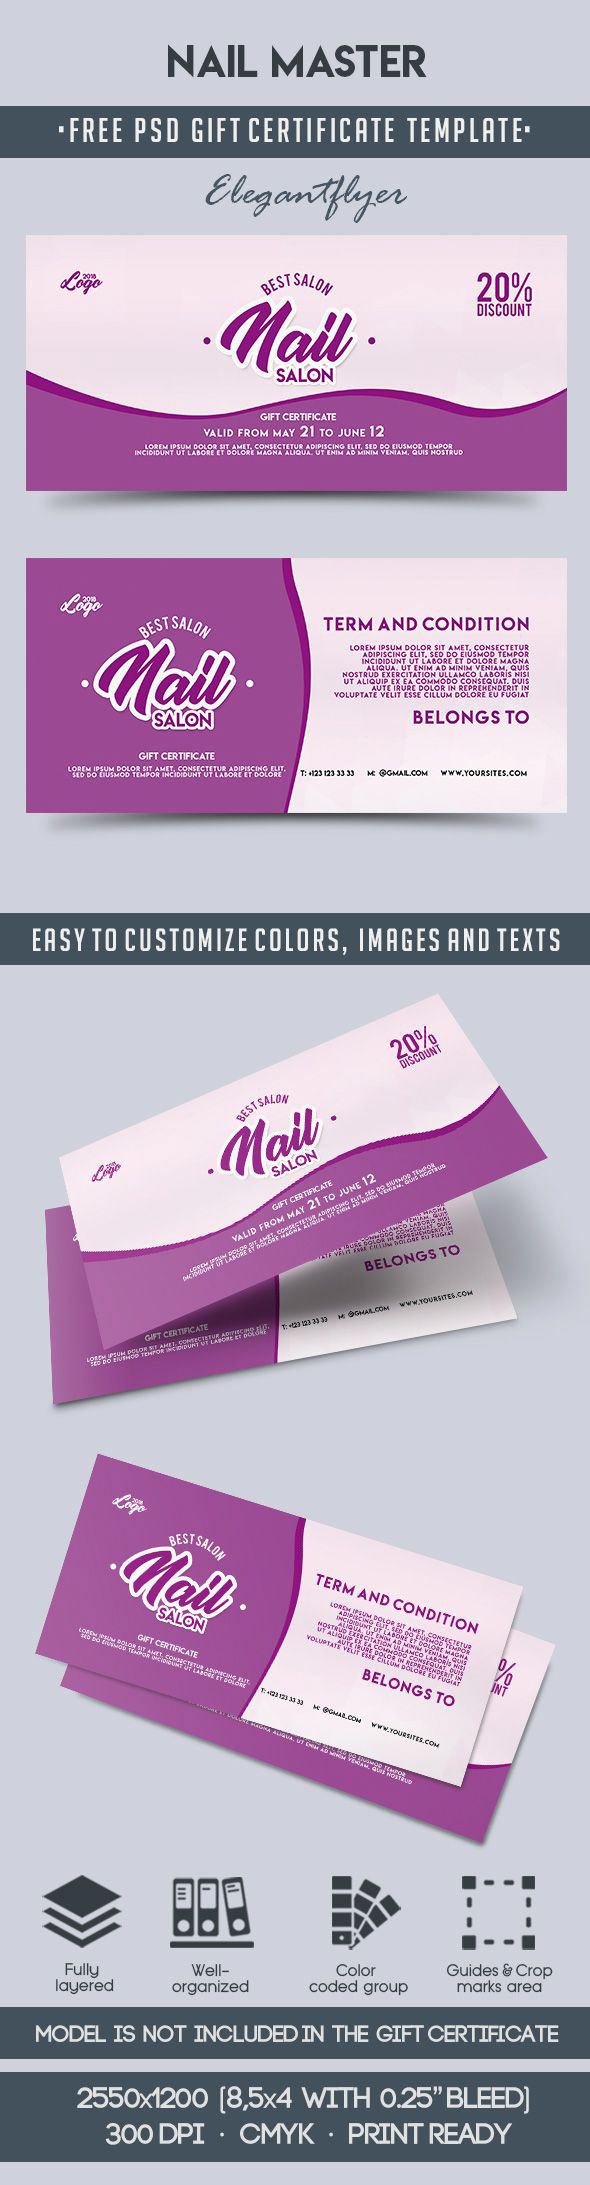 Nail Master – Free Gift Certificate Psd Template On Behance Intended For Nail Gift Certificate Template Free